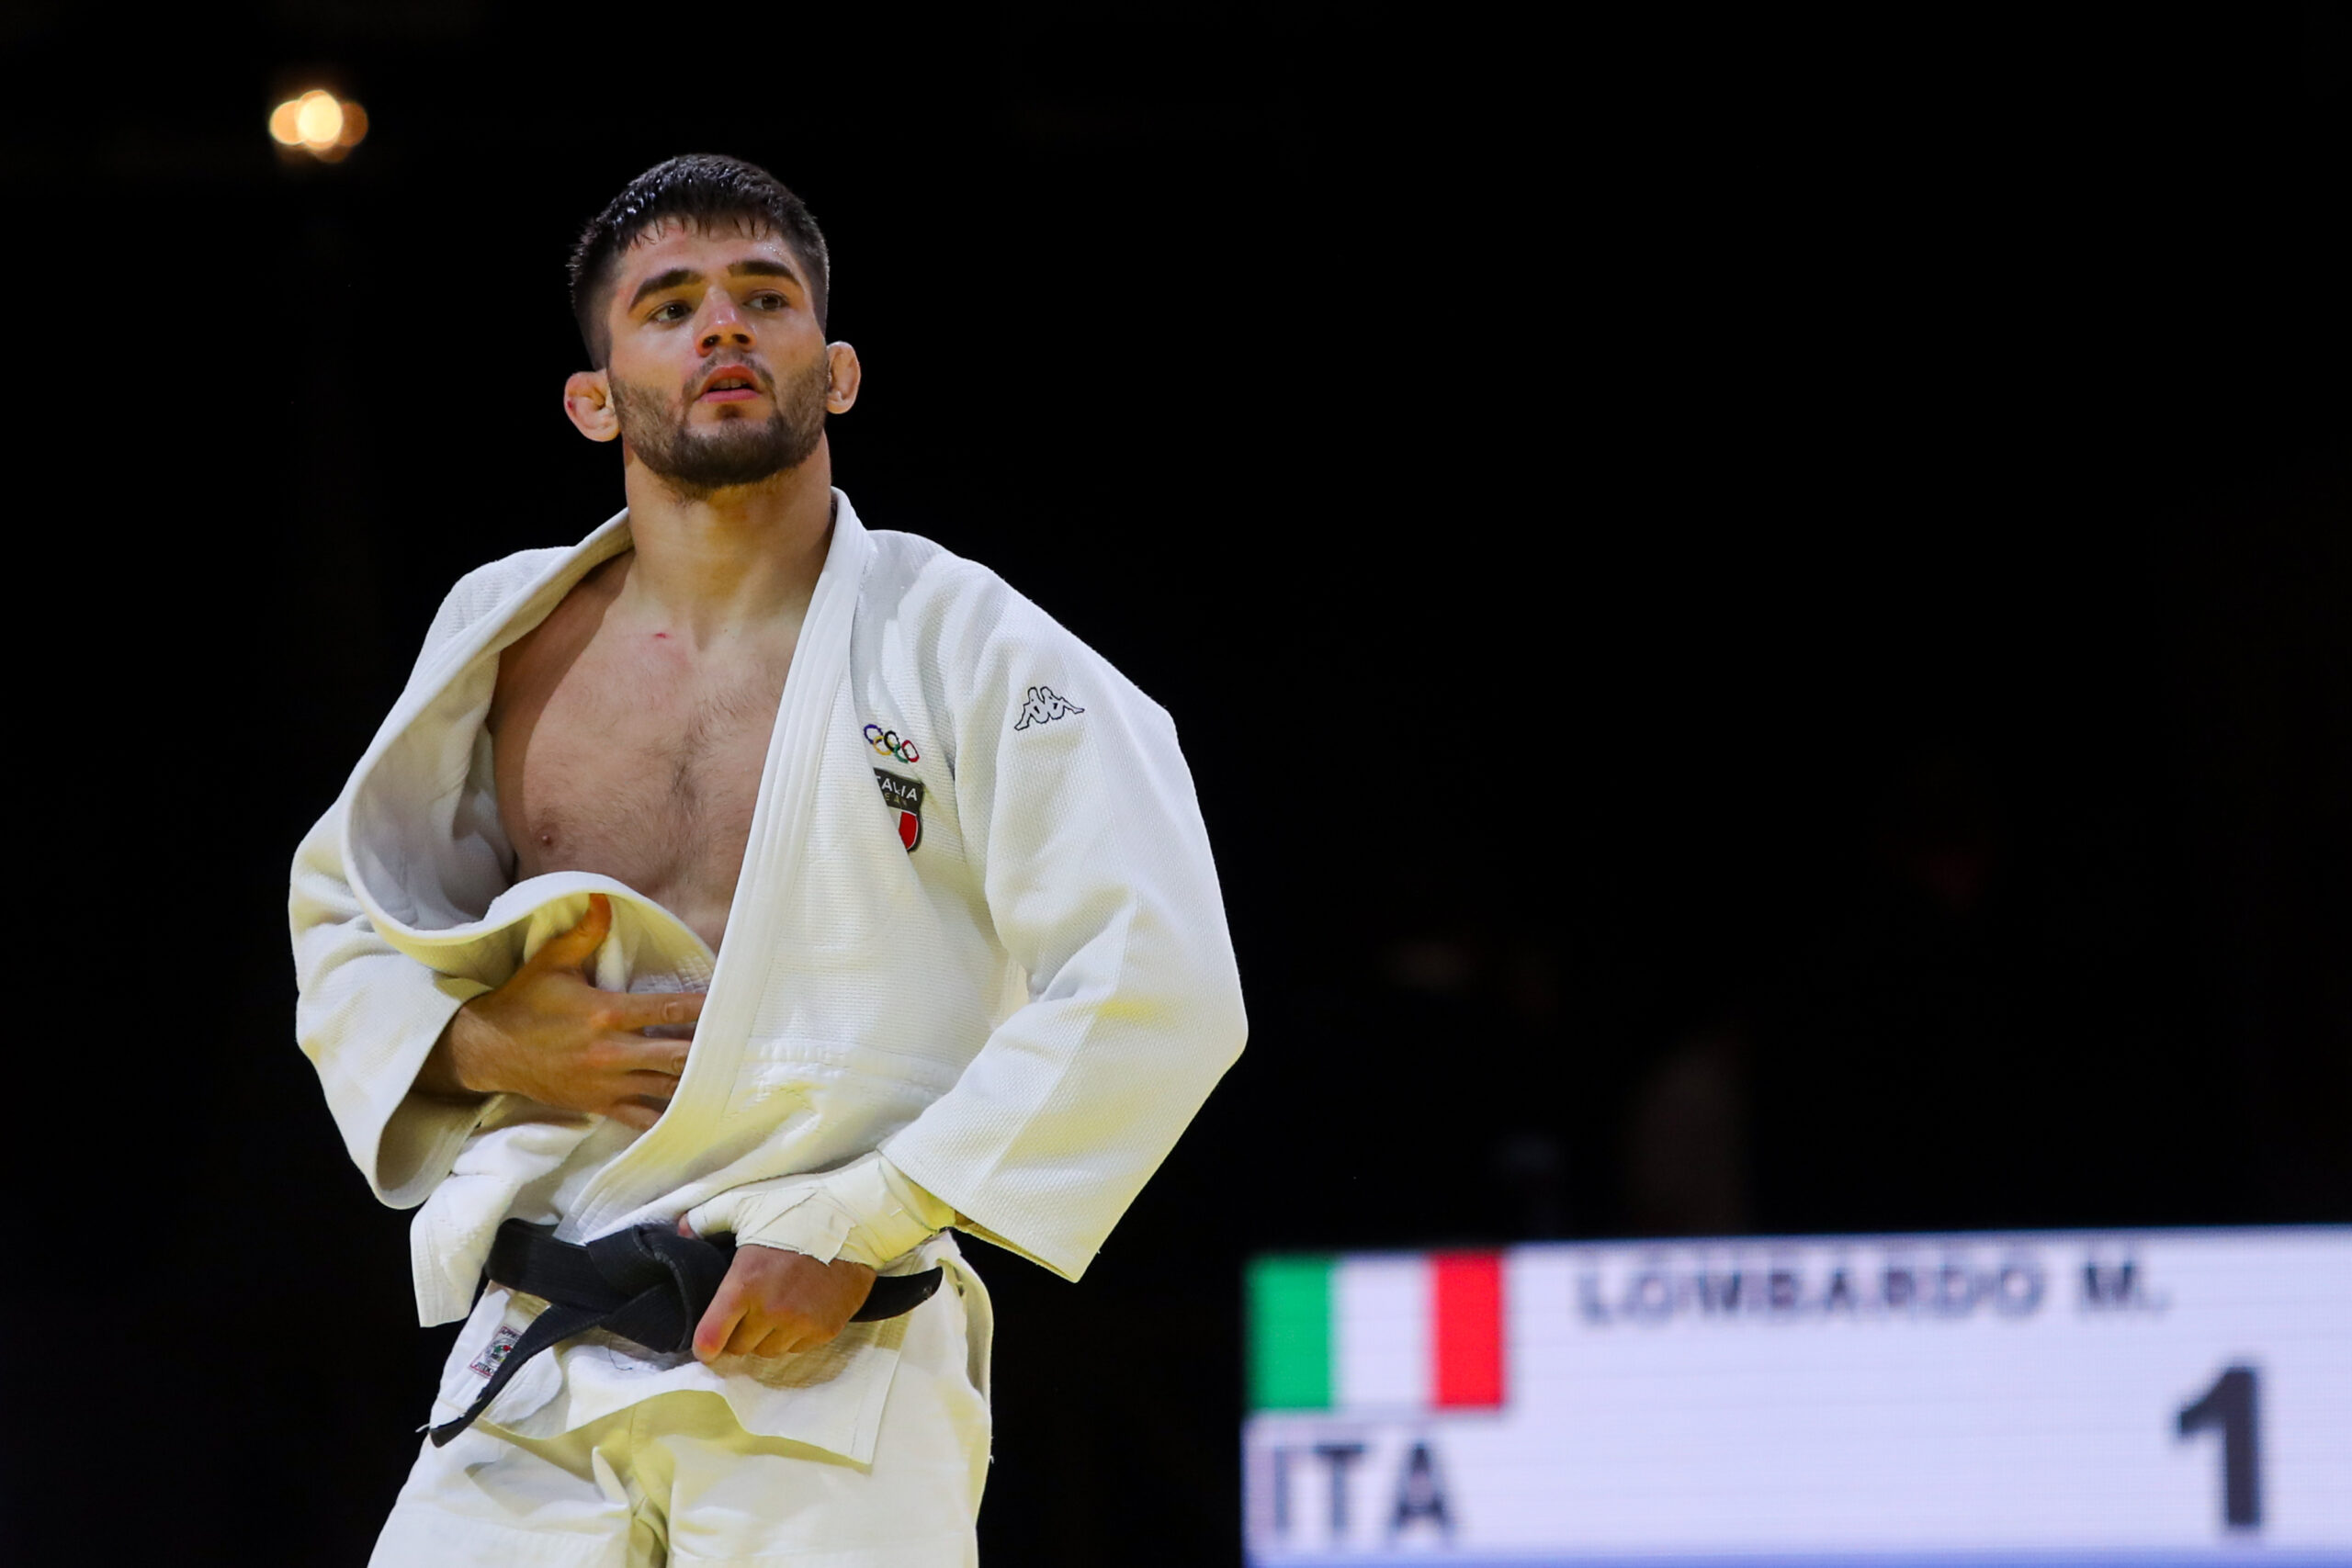 ITALY LOOK TO RETAIN OLYMPIC TITLE IN -66KG AND SWAP SILVER FOR GOLD IN -52KG